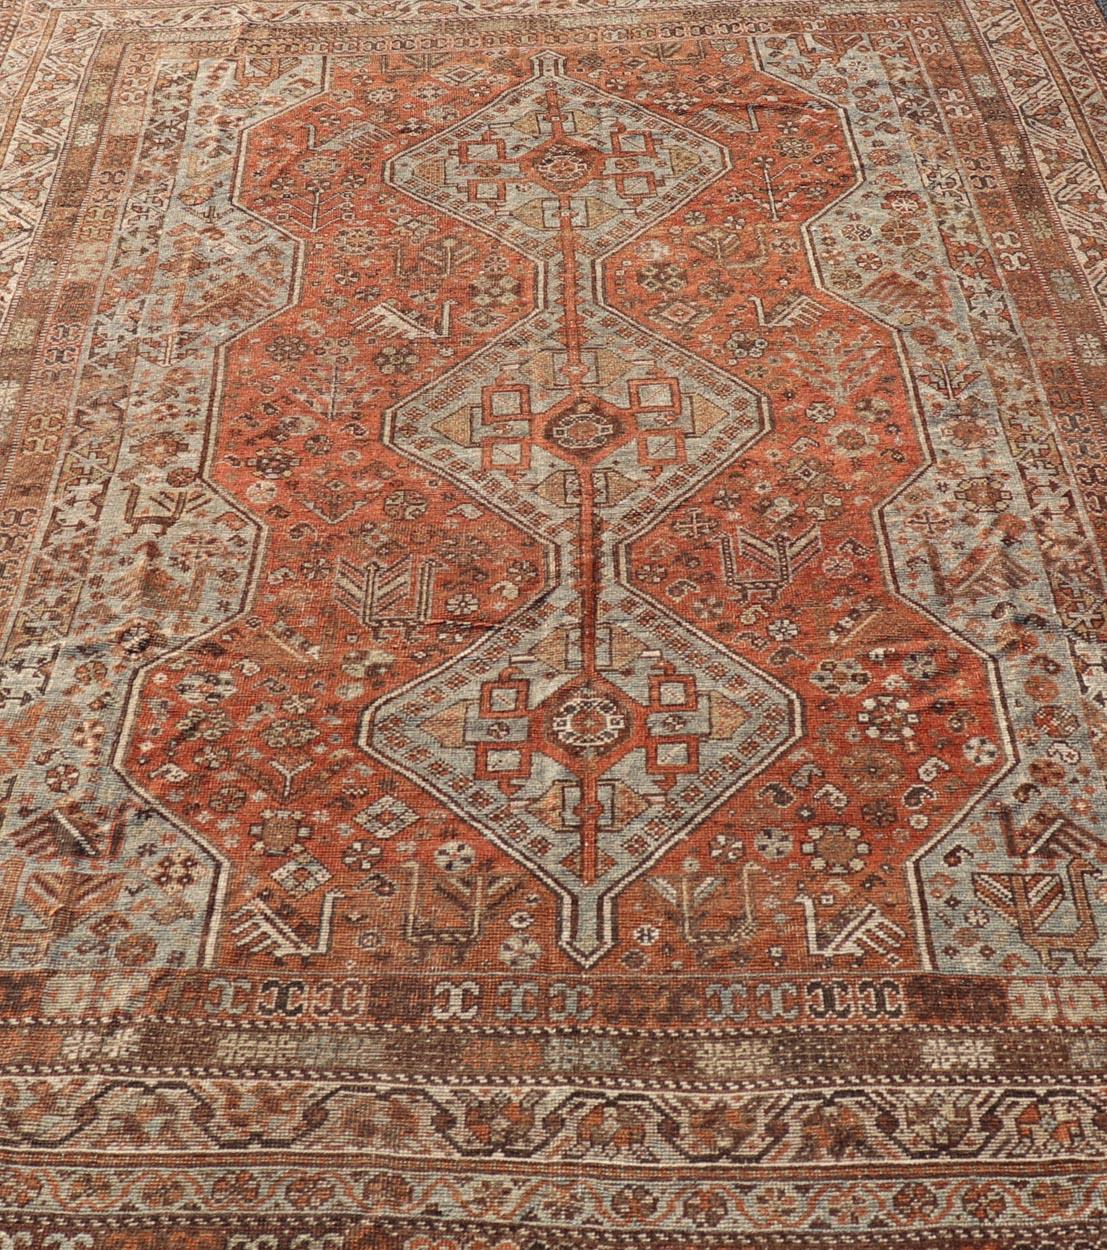 Antique Persian Shiraz Rug With Medallions Geometric in Rusty Orange, Steel Blue For Sale 1